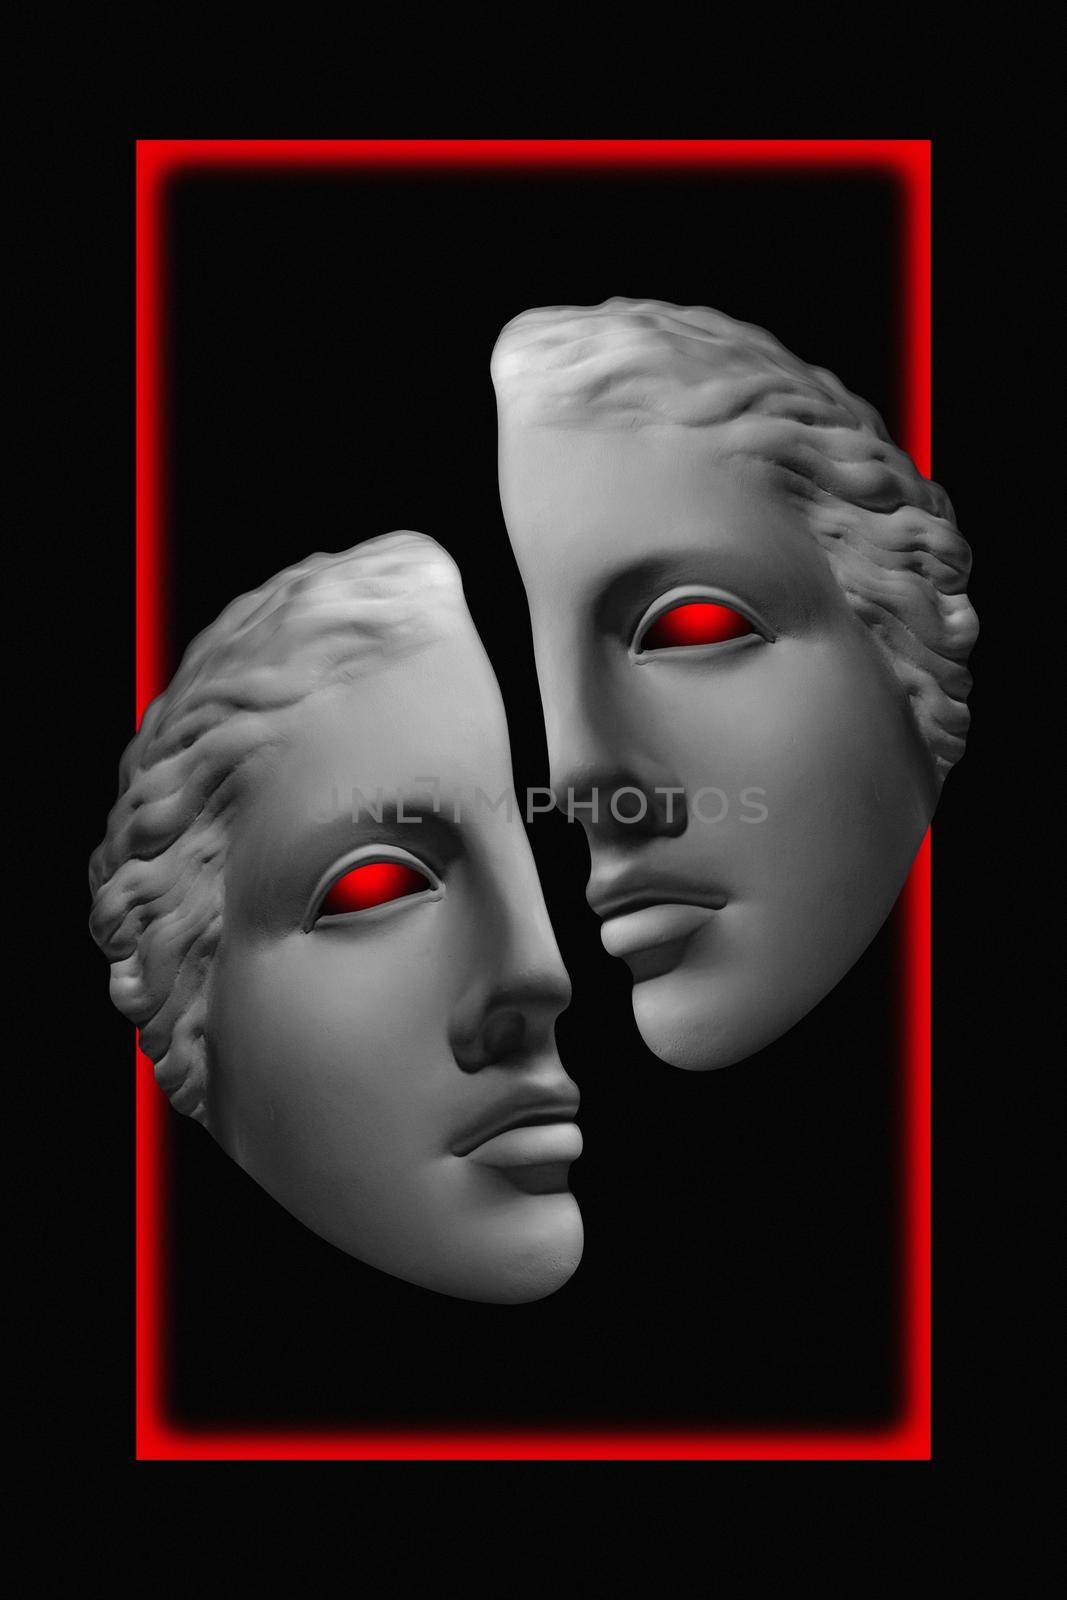 Antique sculpture of human face surreal collage in pop art style. Modern image with cut details of statue head. Red eyes. Dark concept.Contemporary art poster. Funky retro minimalism. Zine culture.